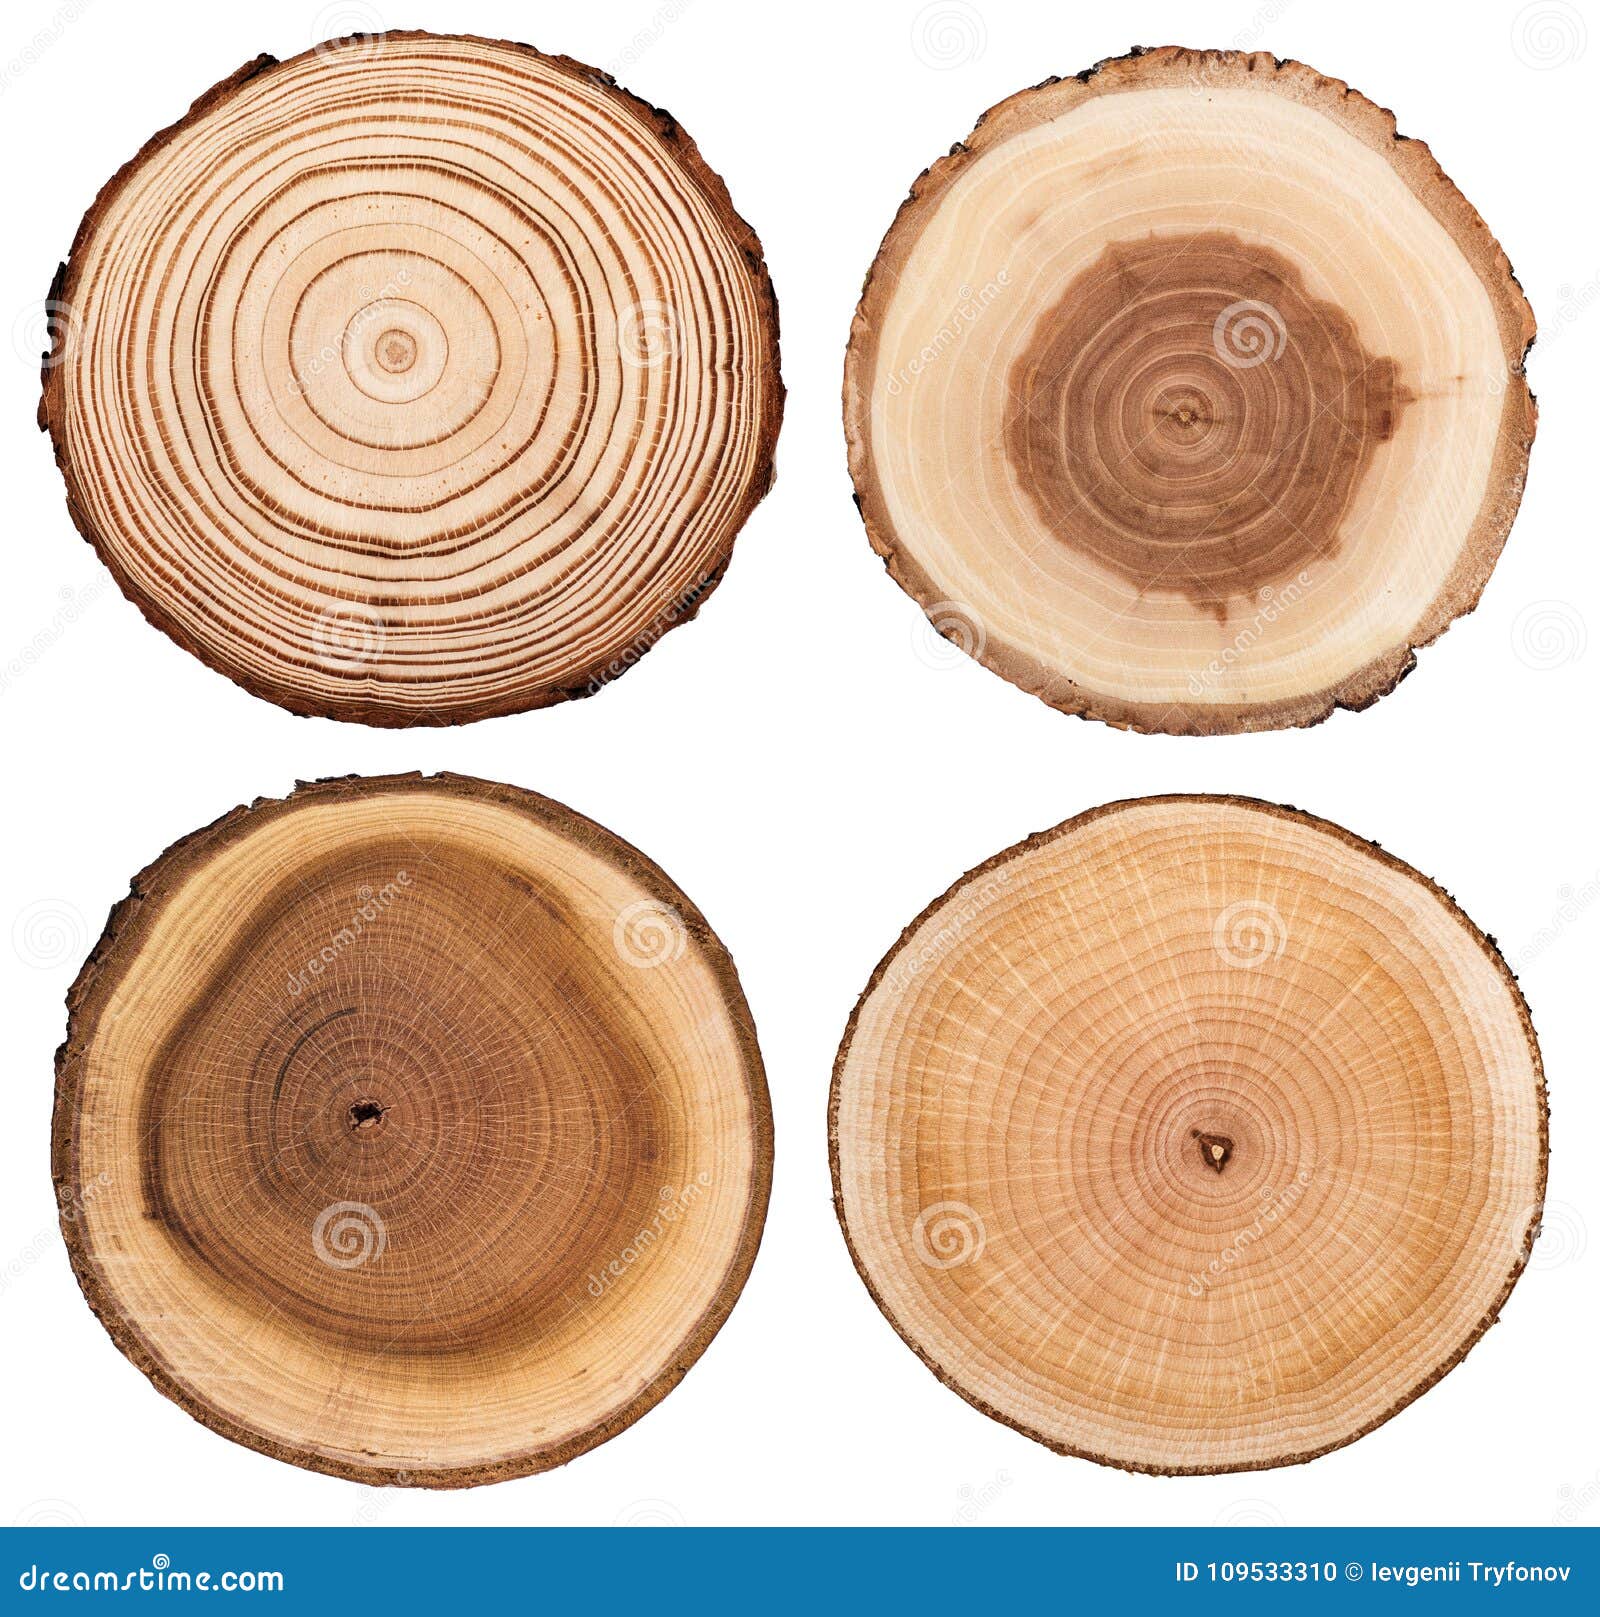 cross section of tree trunk showing growth rings set  on white background.